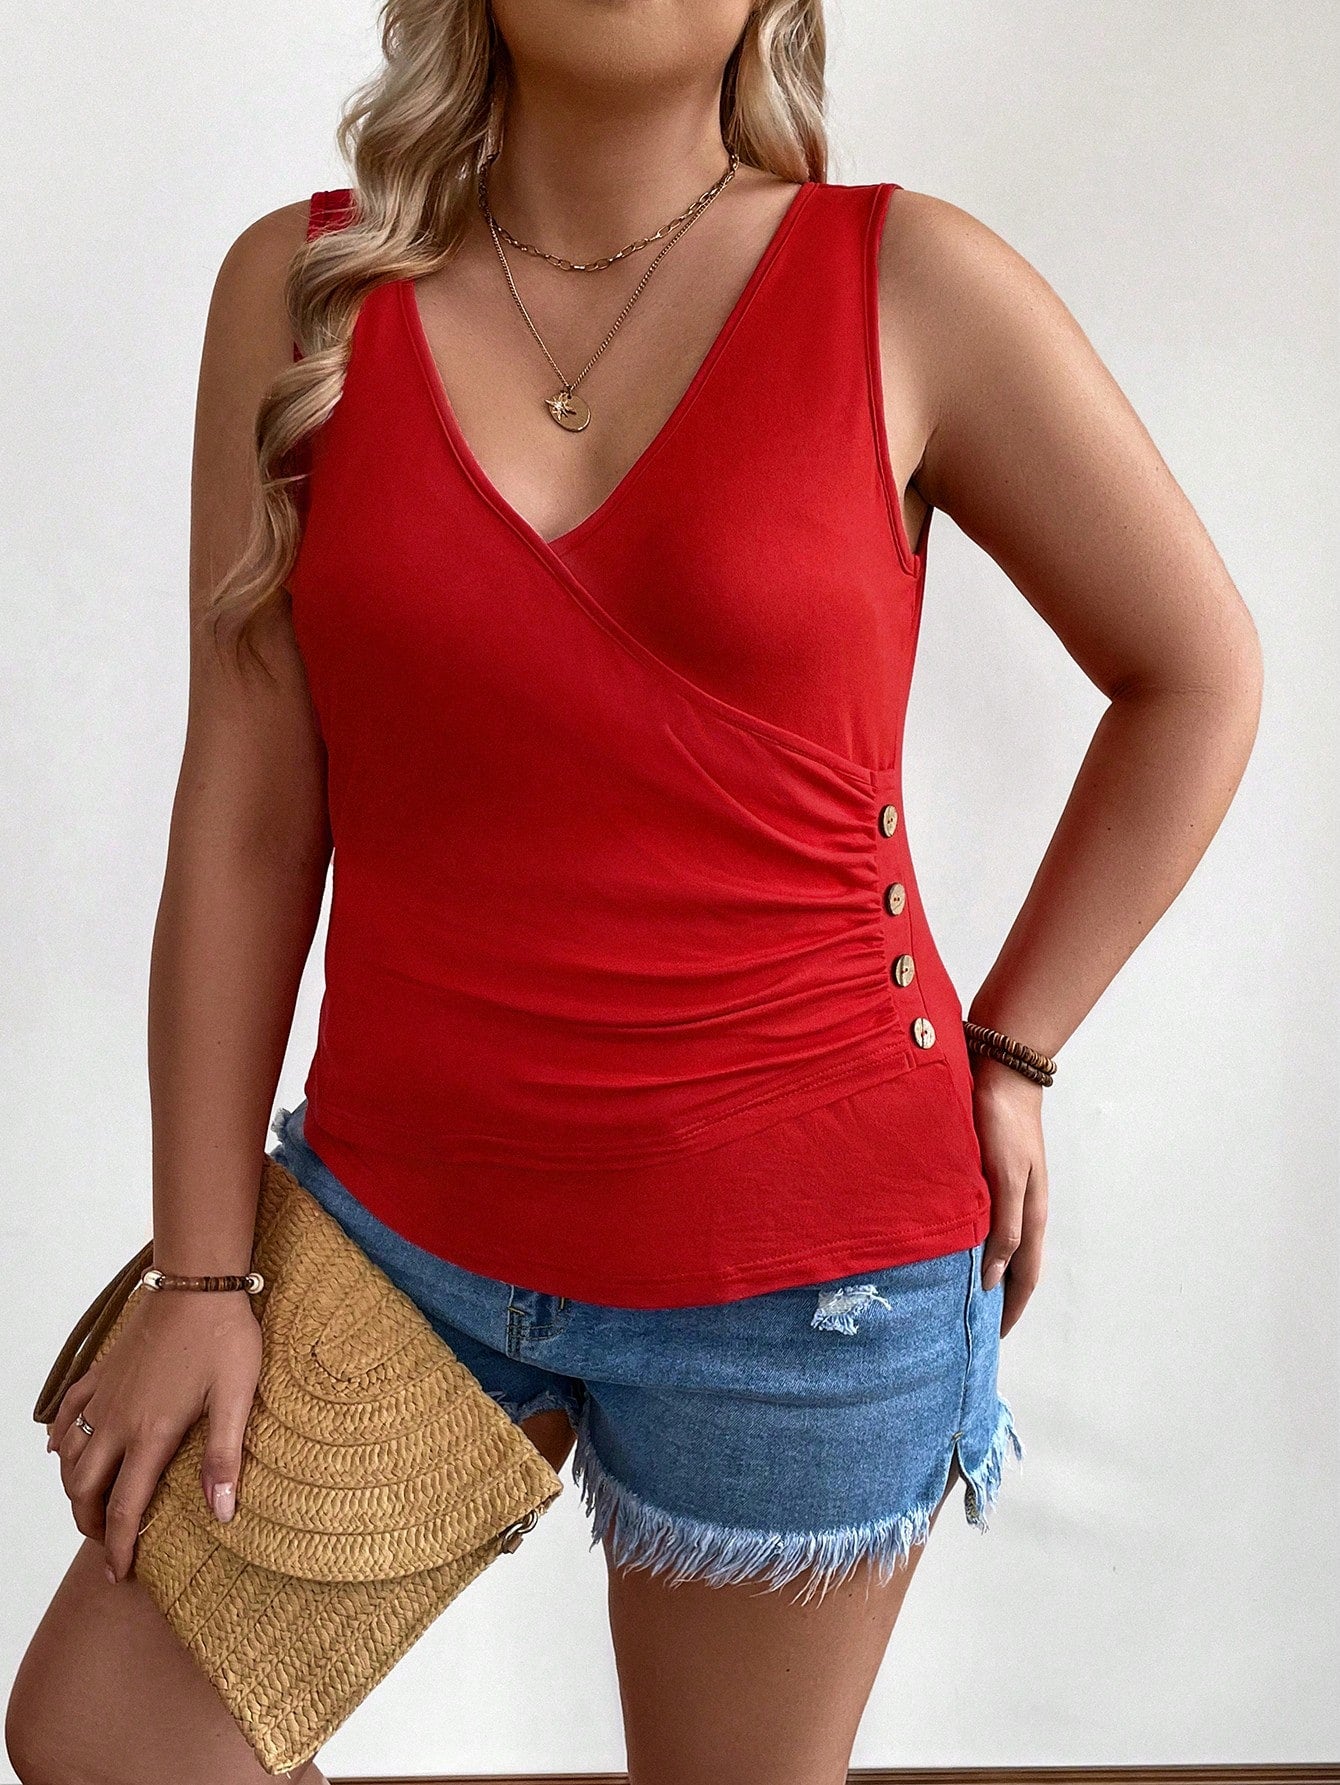 Plus Size Women's Summer Overlap V-Neck Pleated Casual Tank Top